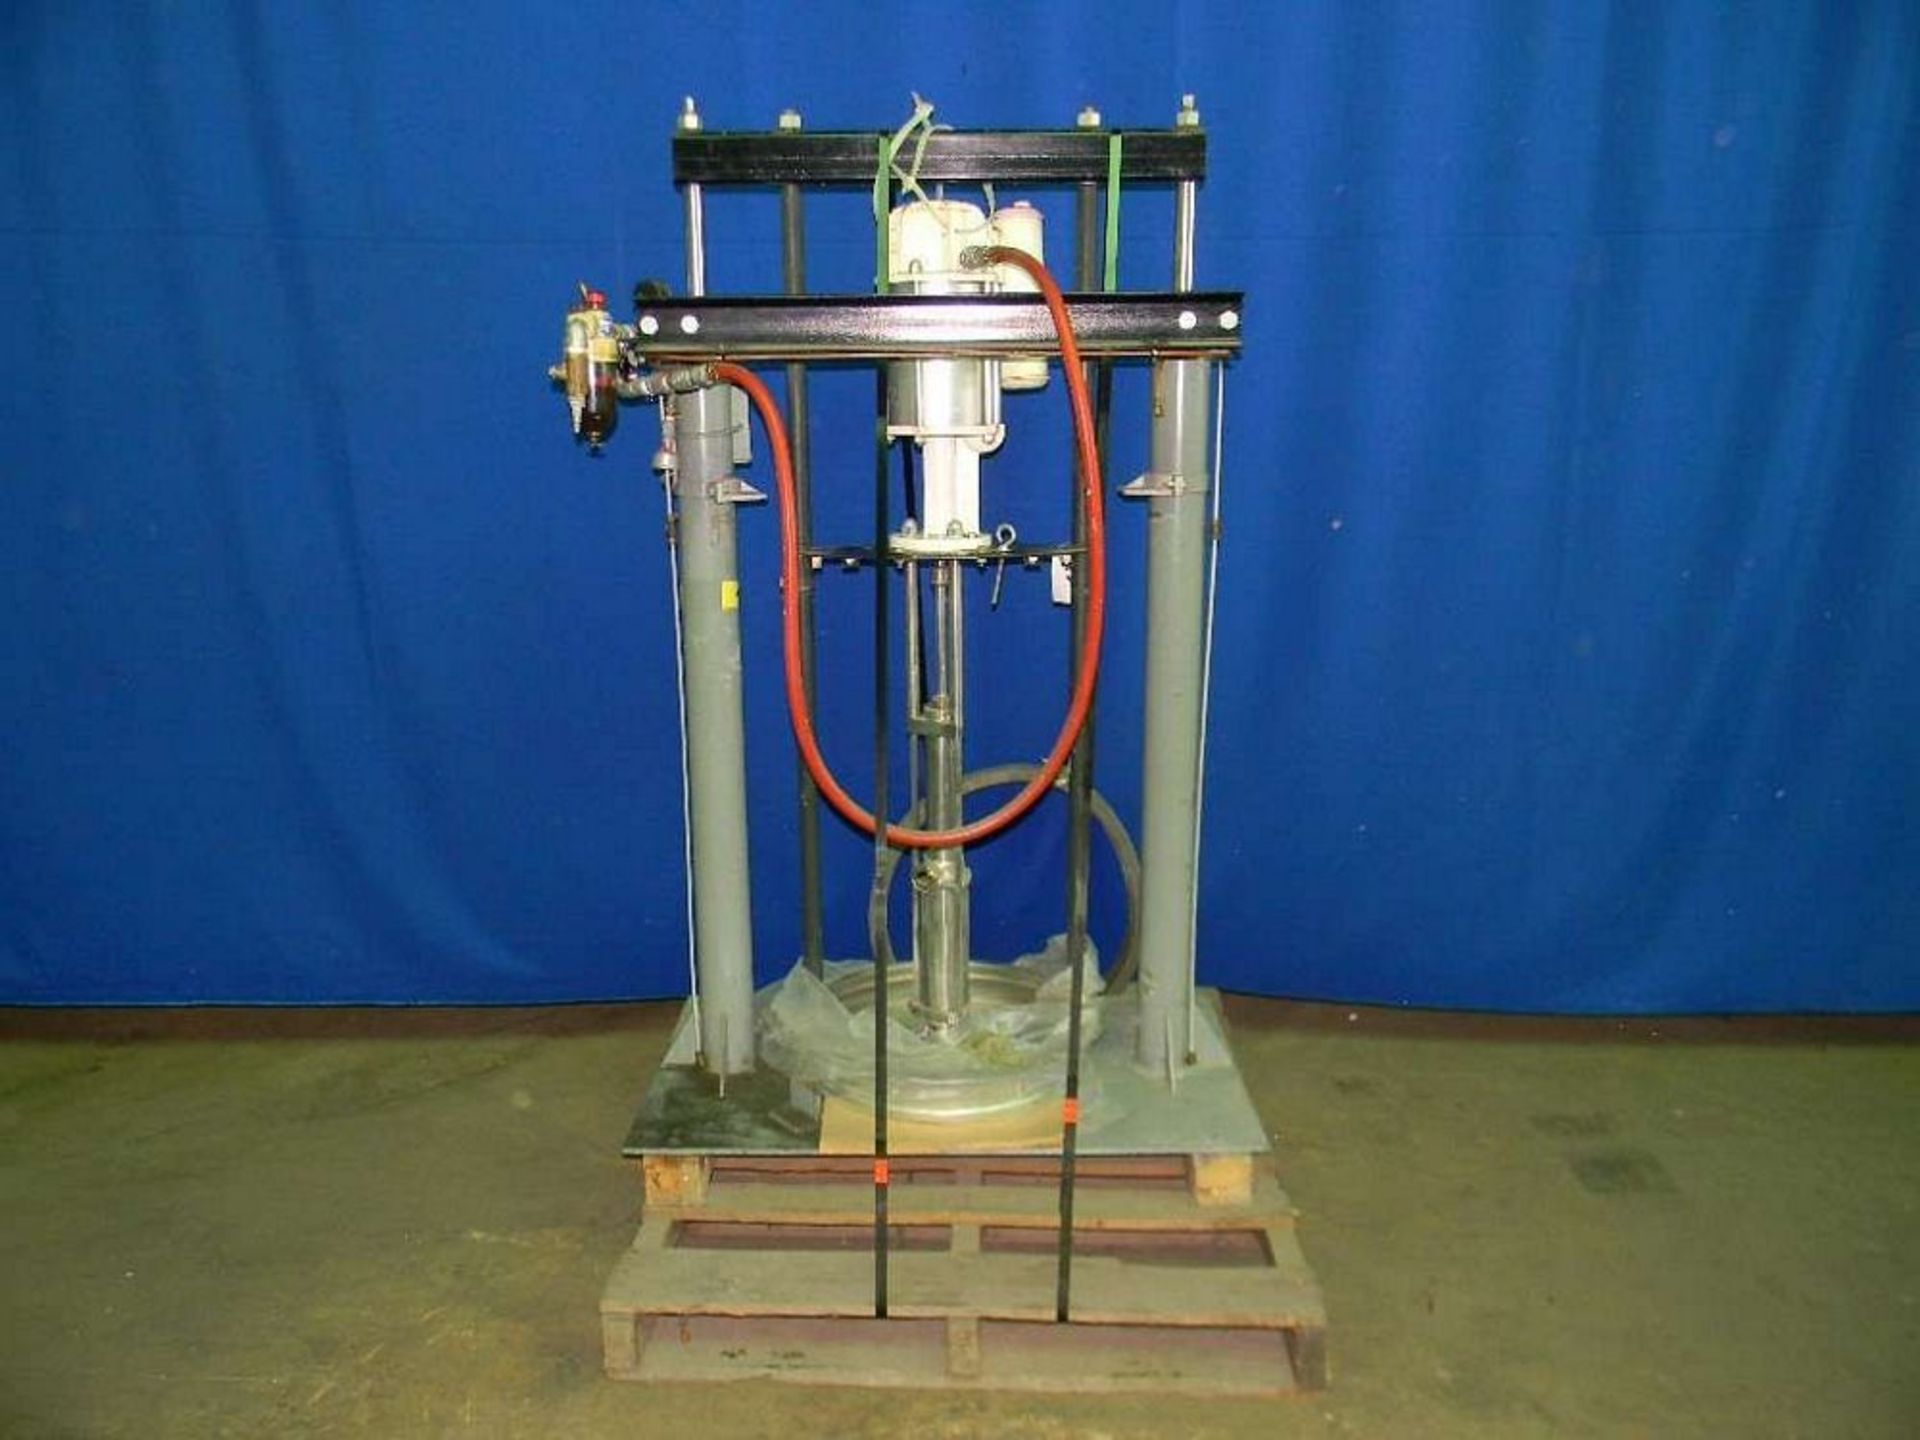 Qty (1) Pneumatic Drum Unloader - Sanitary - Pneumatic driven drum pump. - 22' diameter plunger with - Image 5 of 7